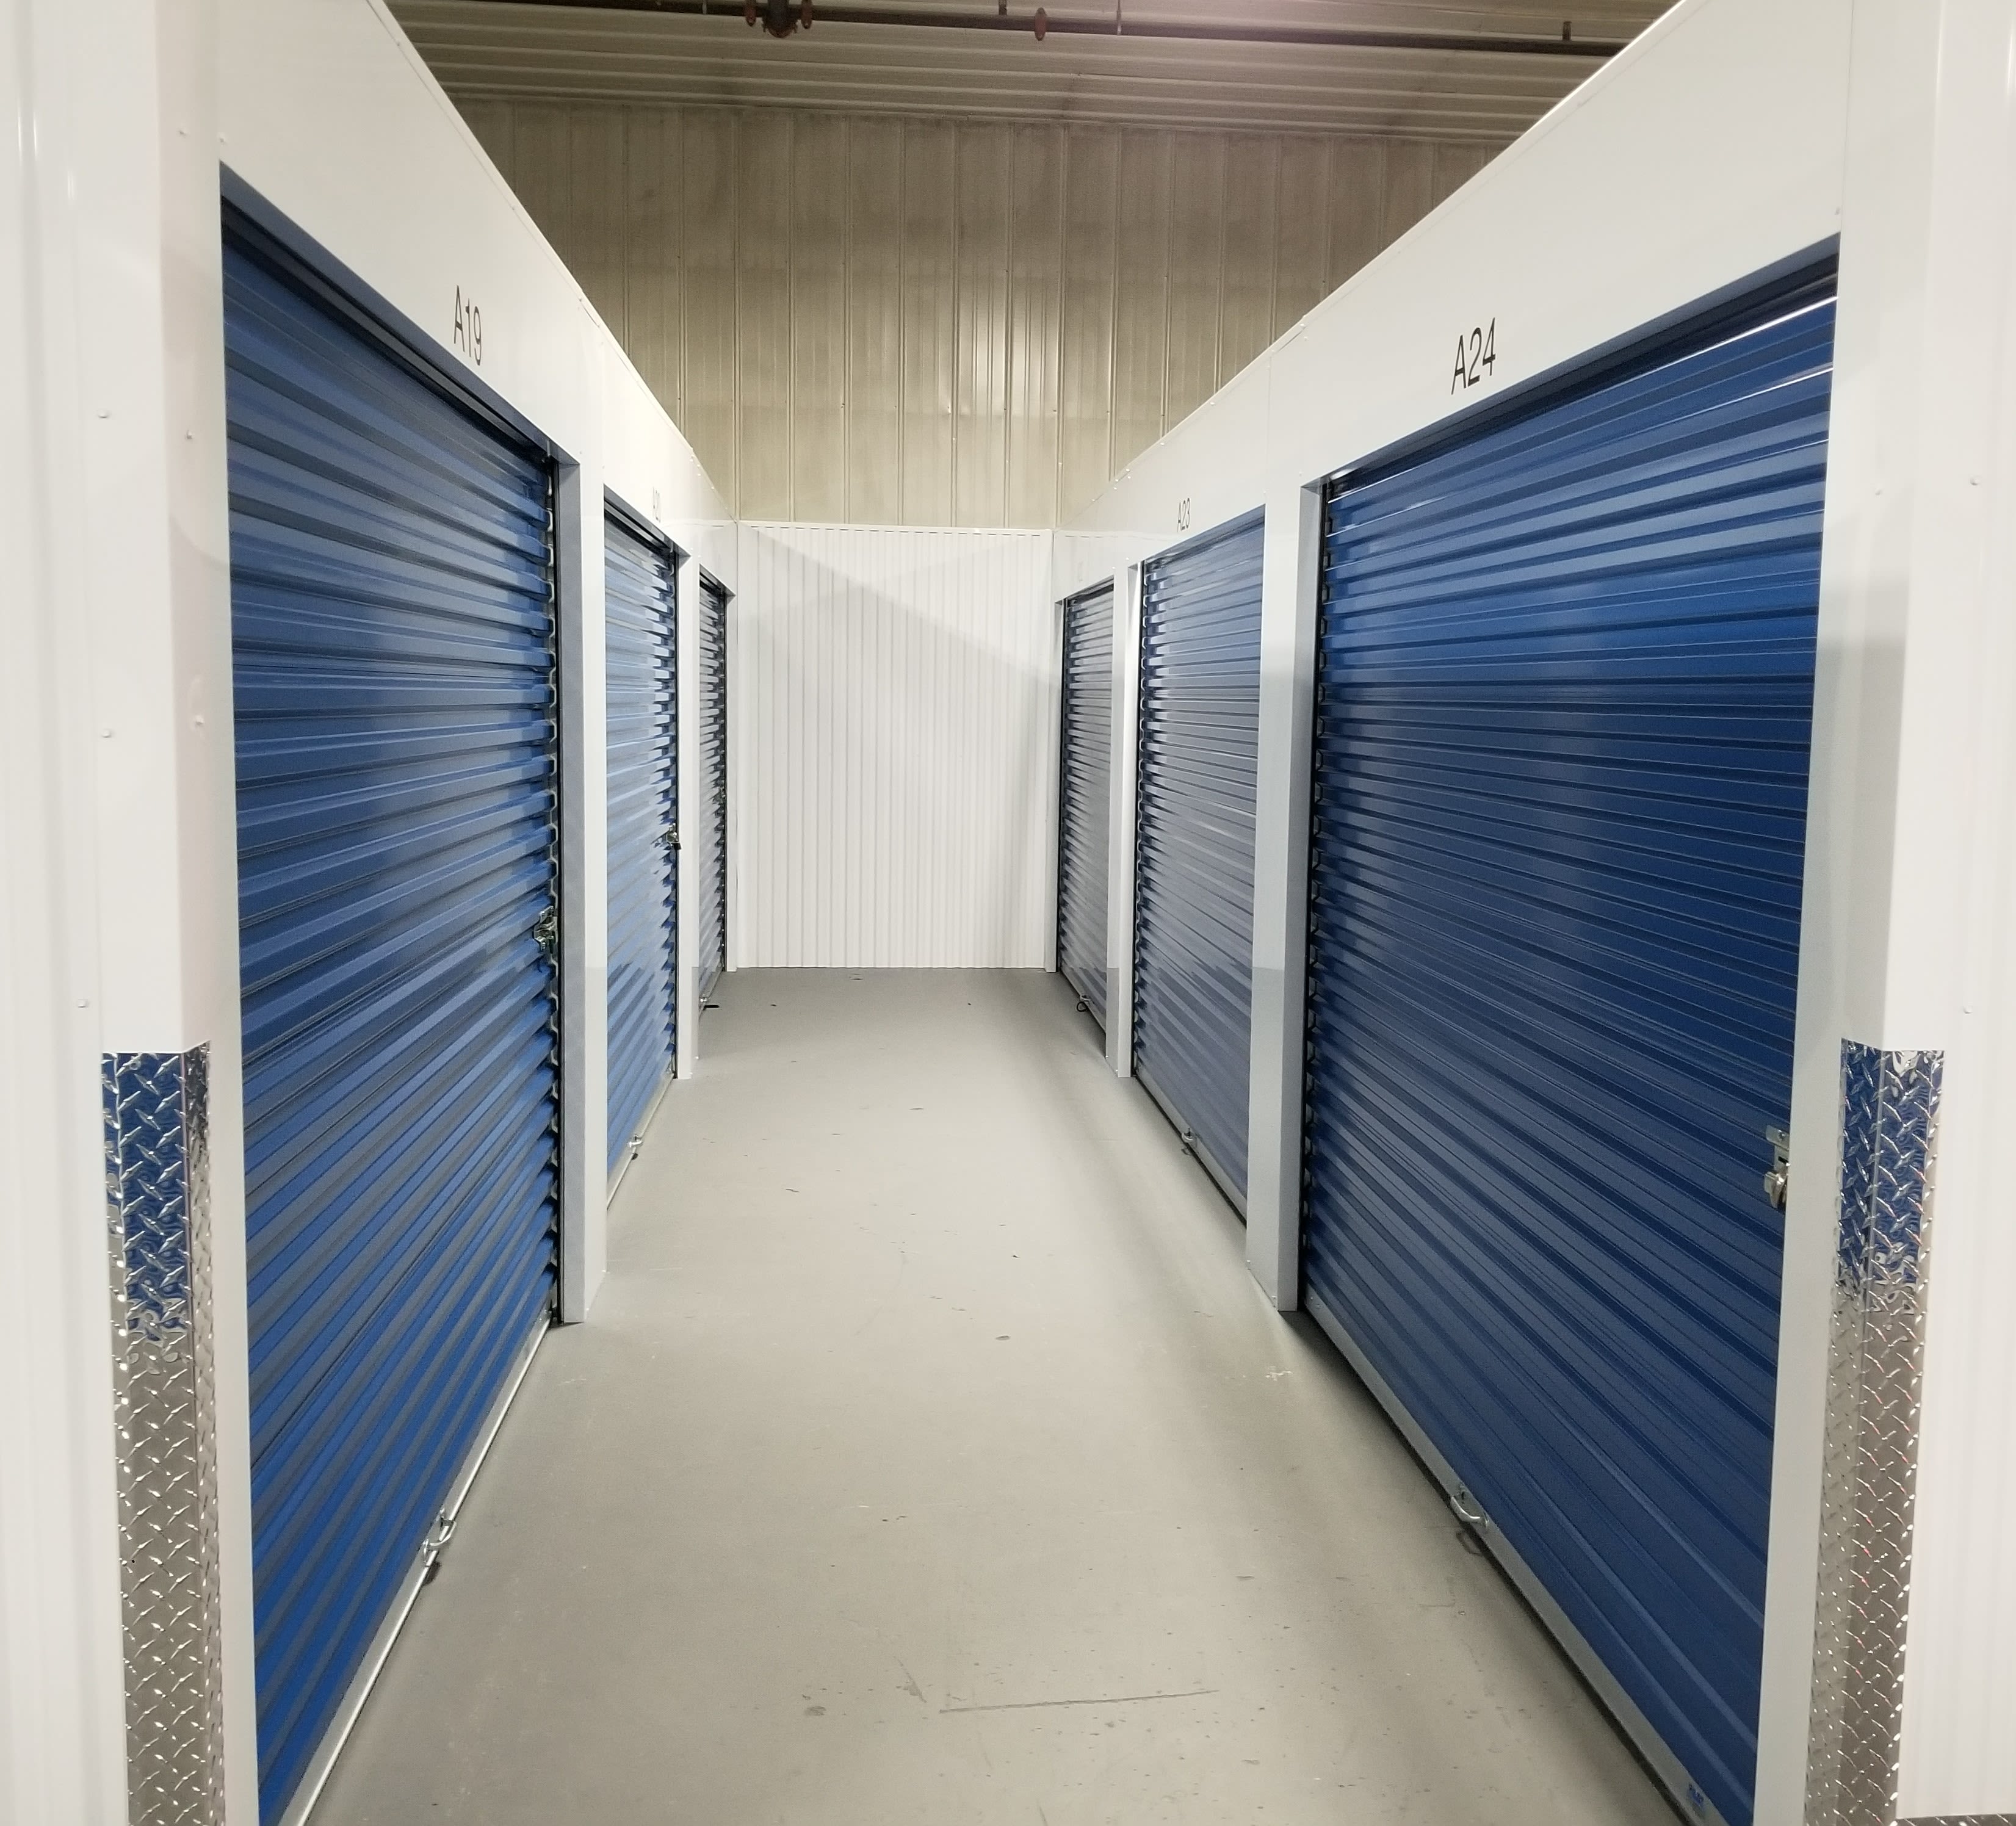 Learn more about features at KO Storage of Maple Plain in Maple Plain, Minnesota